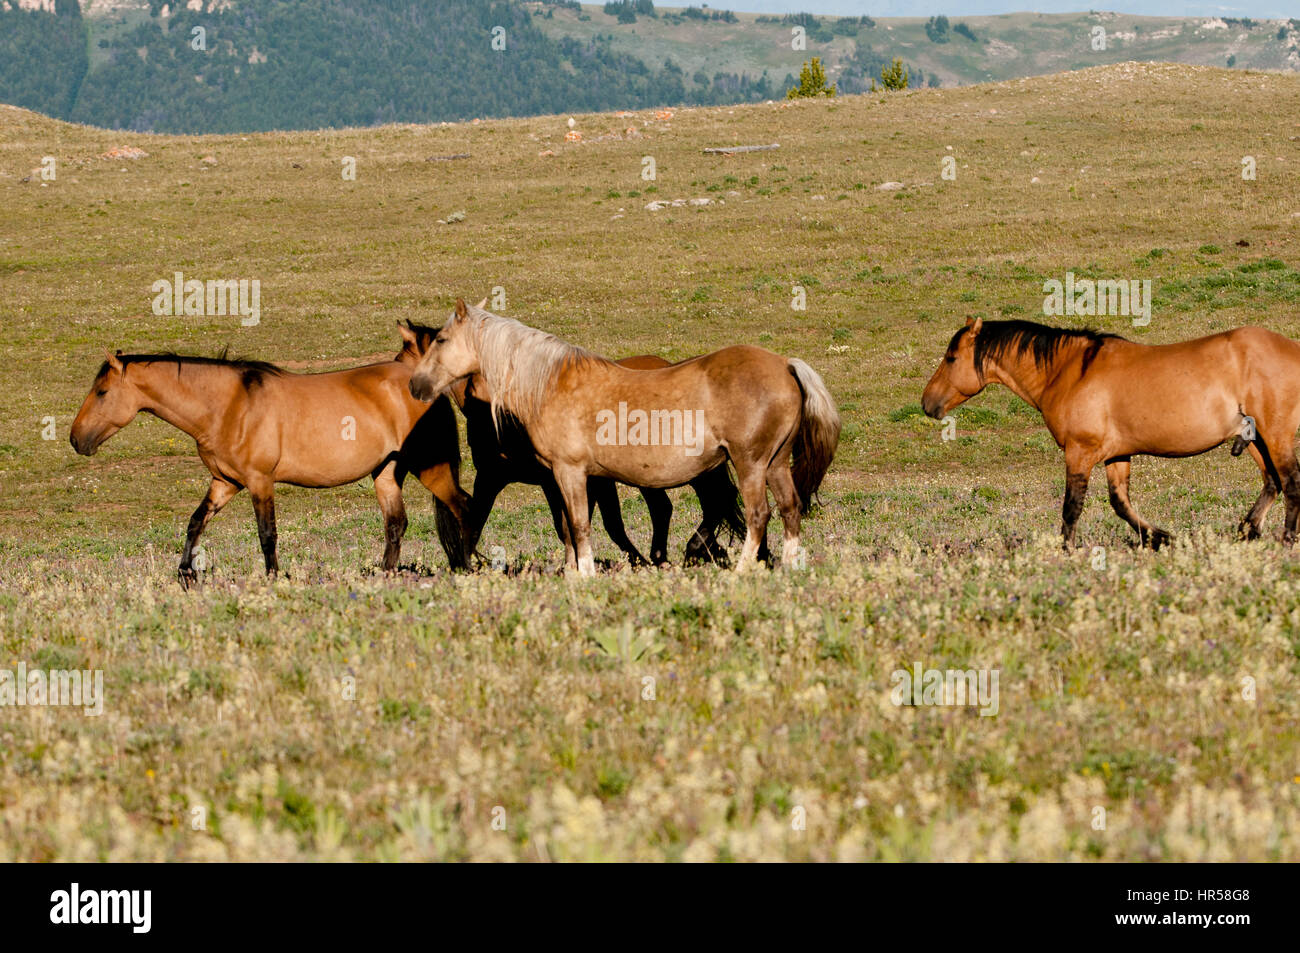 Mustangs Pryor Mountains walking Banque D'Images